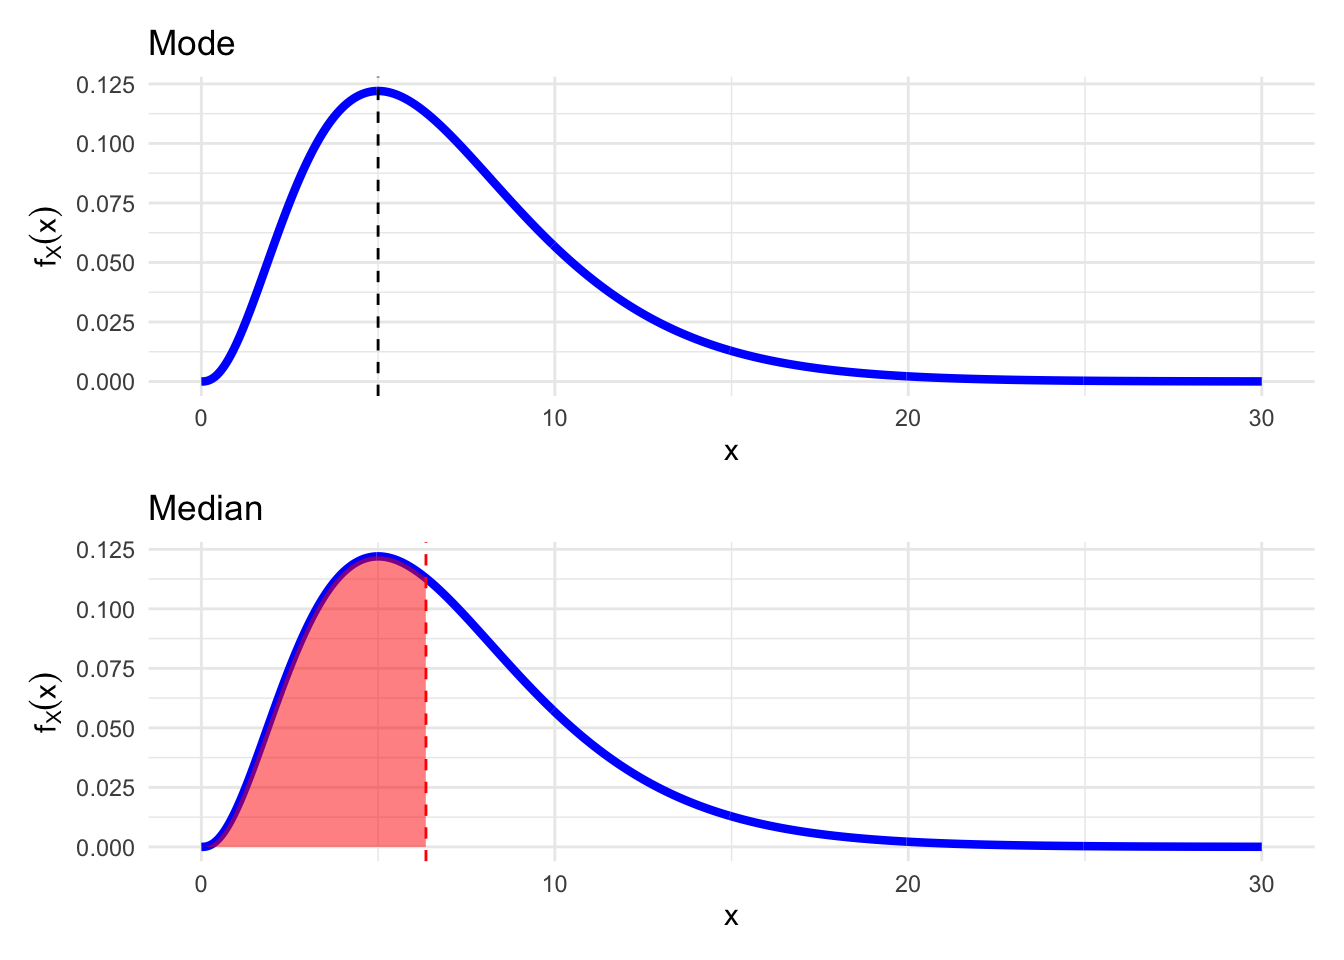 Mode and Median of an asymmetric distribution